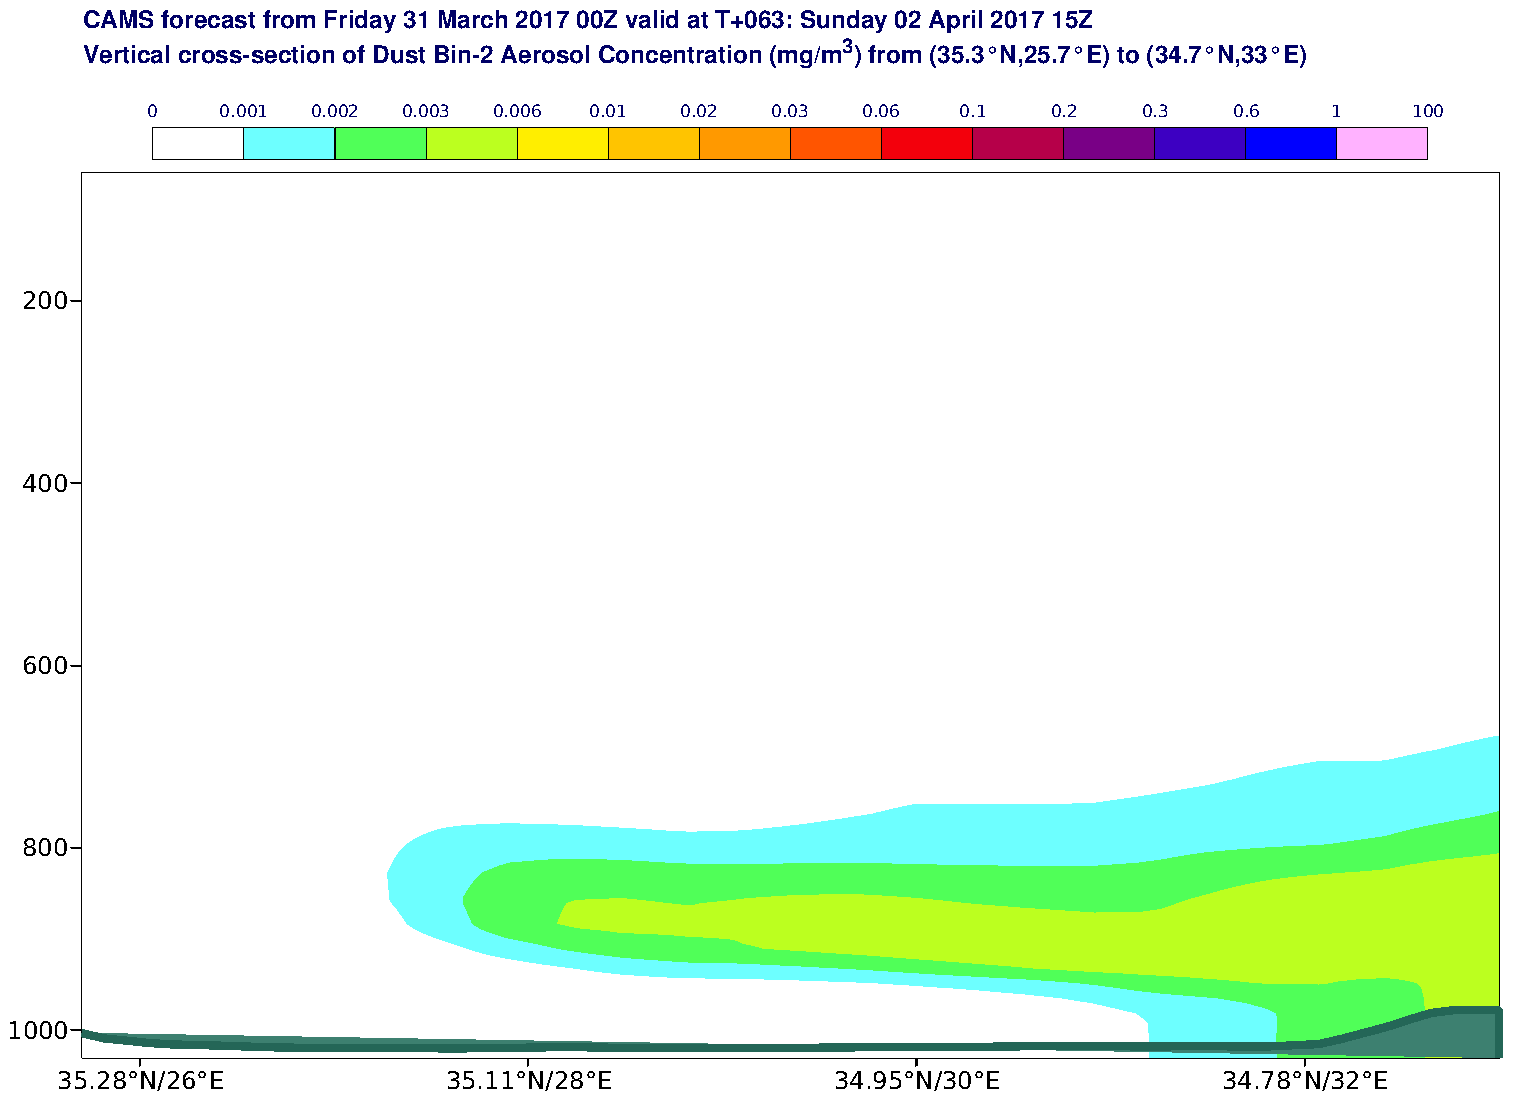 Vertical cross-section of Dust Bin-2 Aerosol Concentration (mg/m3) valid at T63 - 2017-04-02 15:00